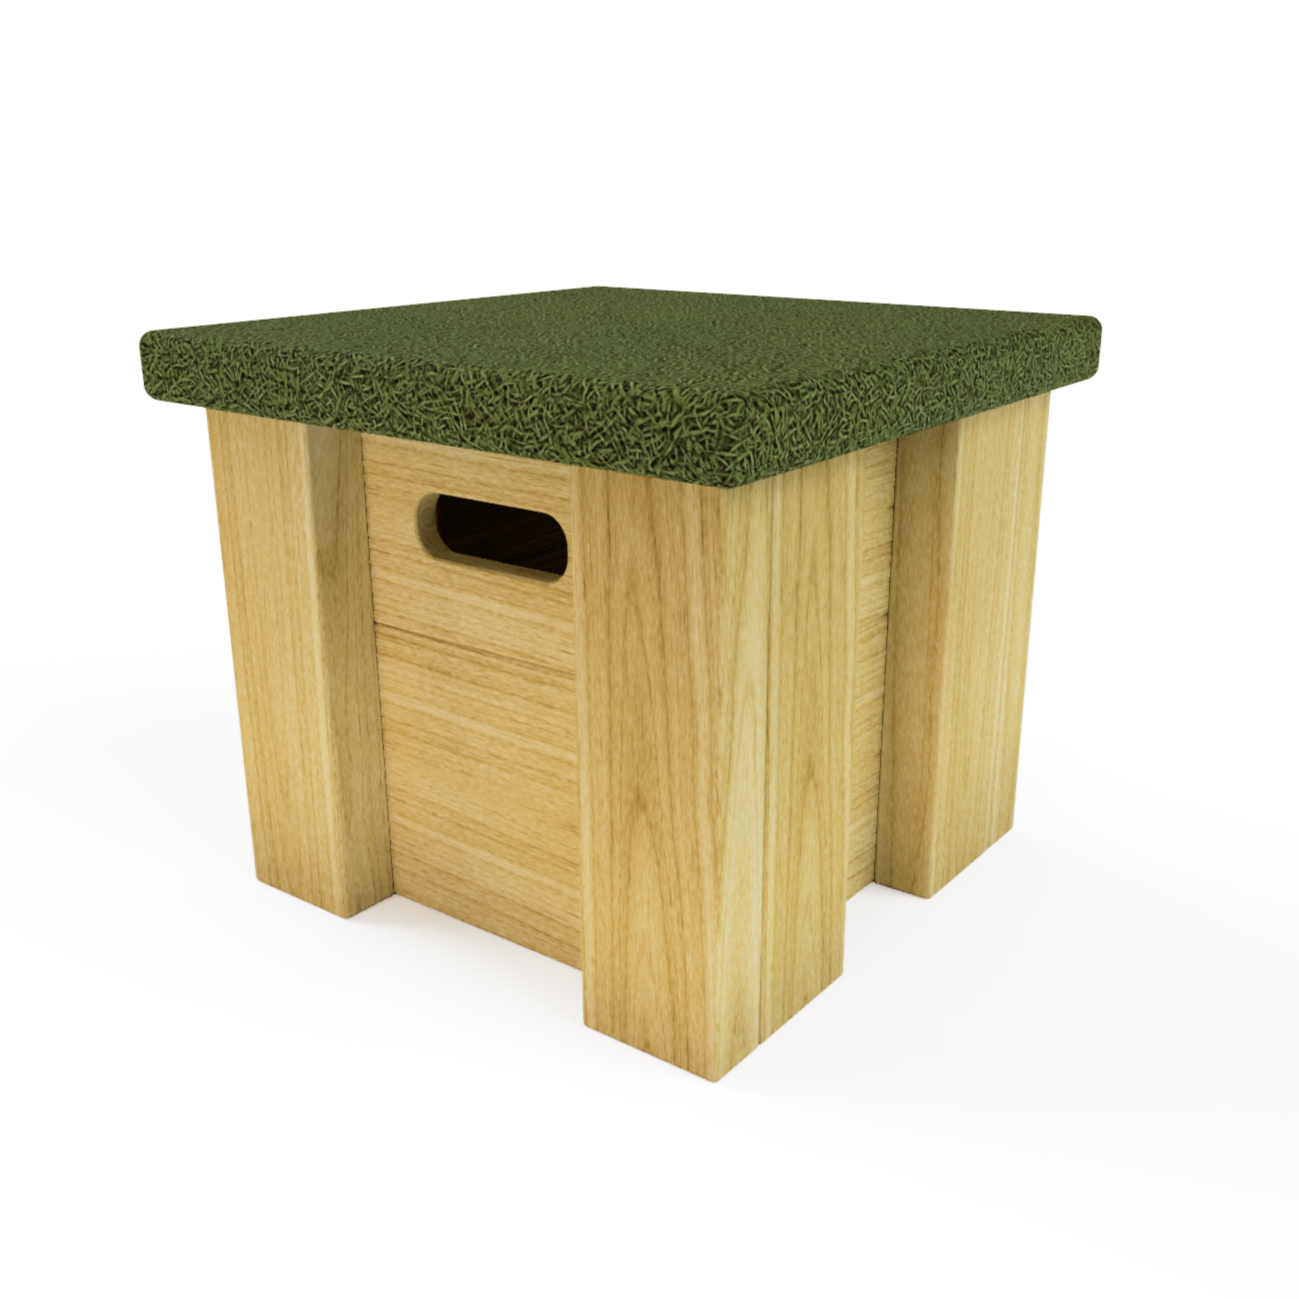 Grass-topped Stools